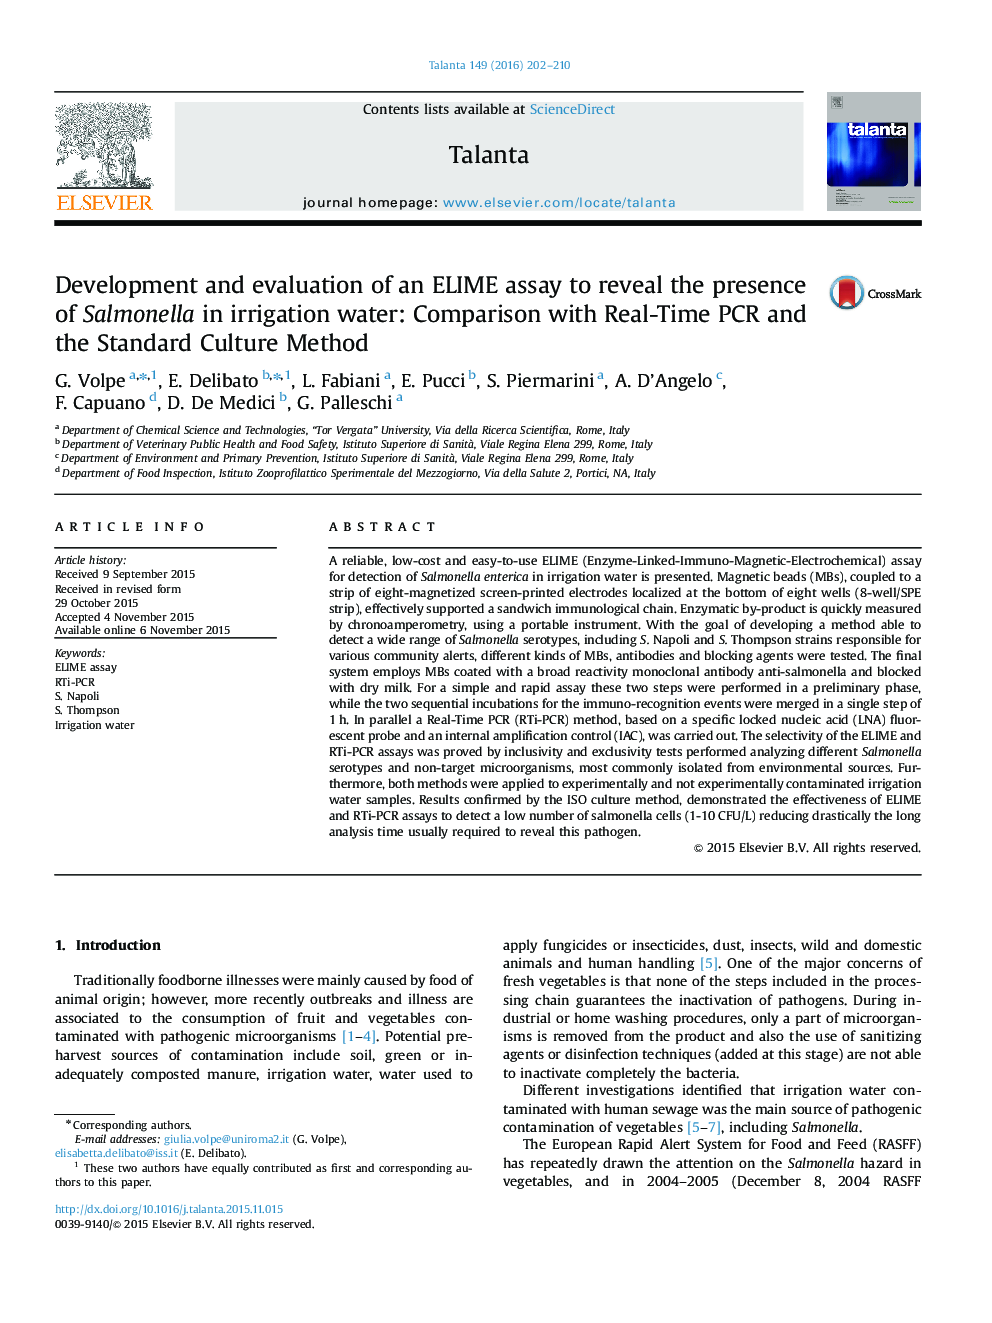 Development and evaluation of an ELIME assay to reveal the presence of Salmonella in irrigation water: Comparison with Real-Time PCR and the Standard Culture Method